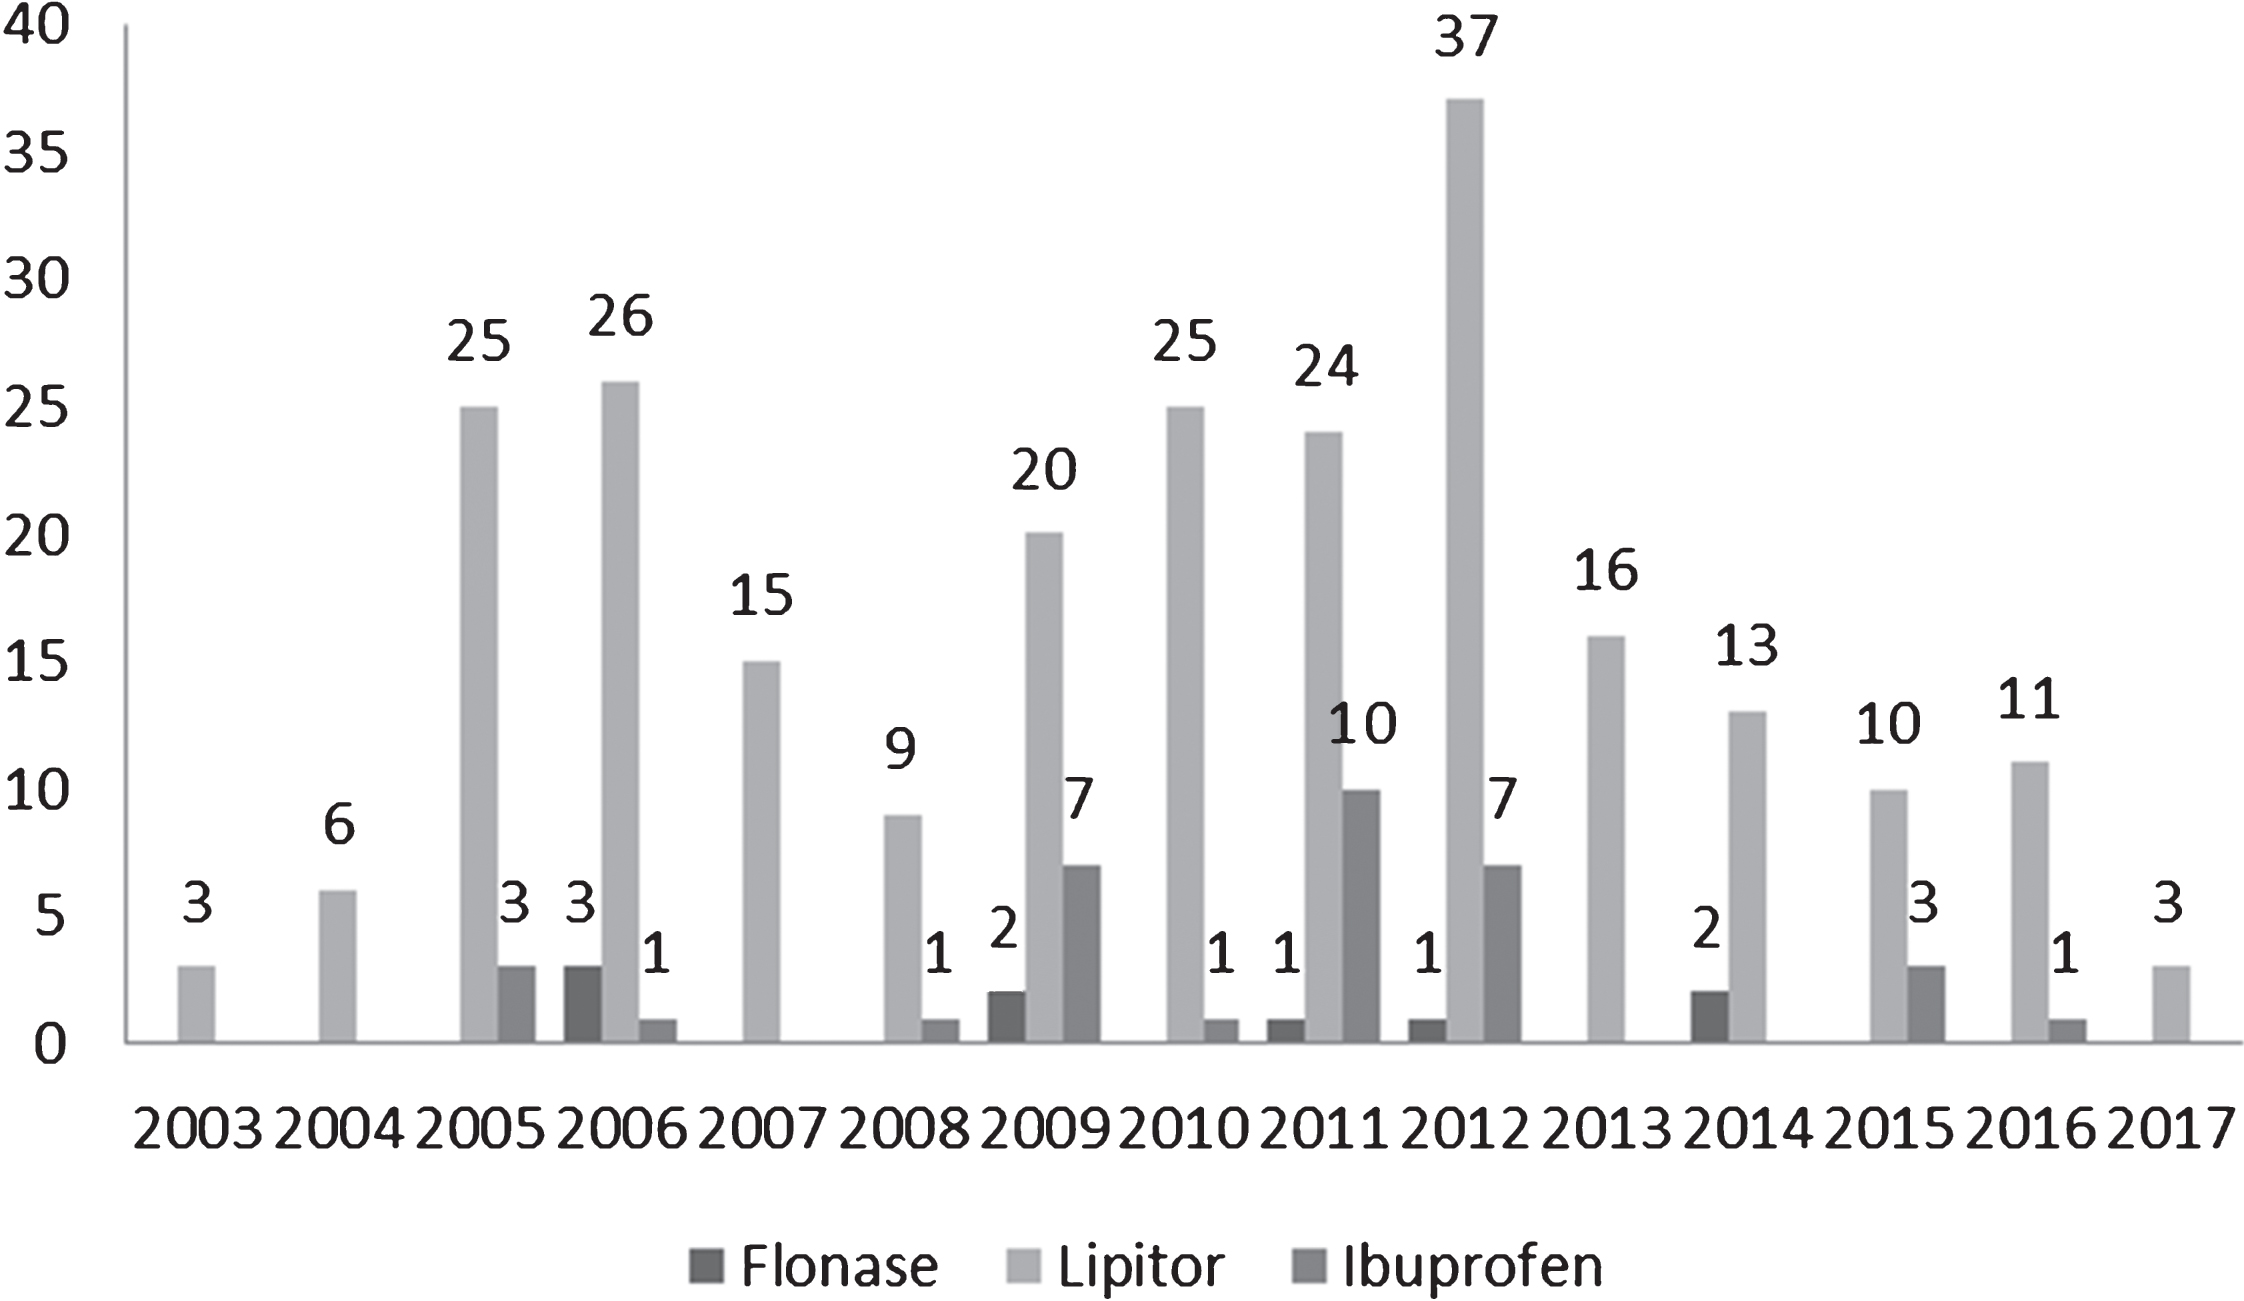 MedWatch Alzheimer’s disease reports in patients using Flonase, Lipitor (atorvastatin), and ibuprofen by year. Number of reports is above the corresponding bar.